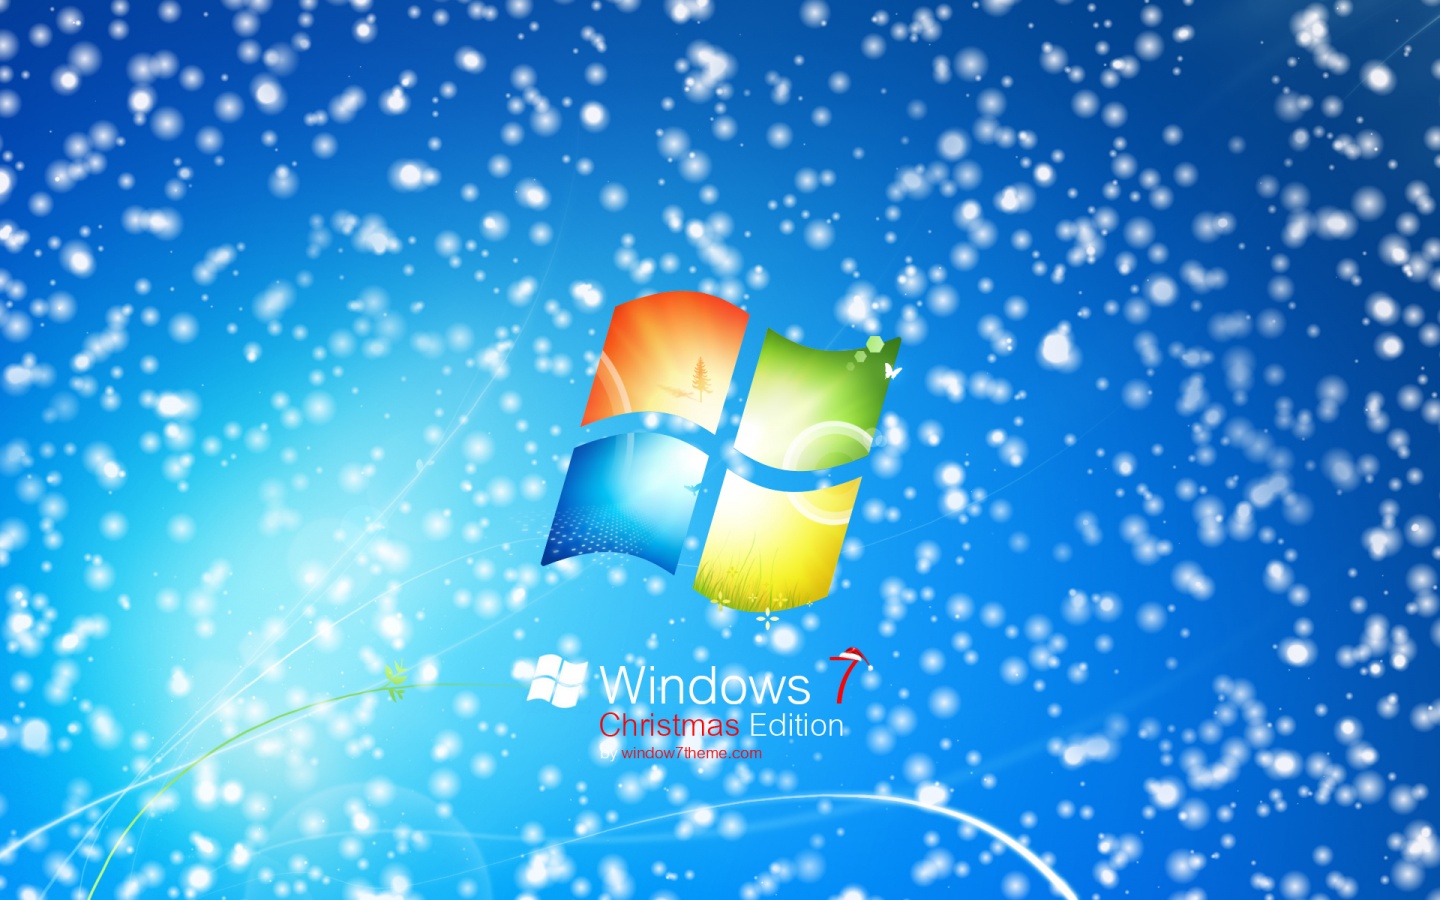 apple wallpapers for windows 7 free download